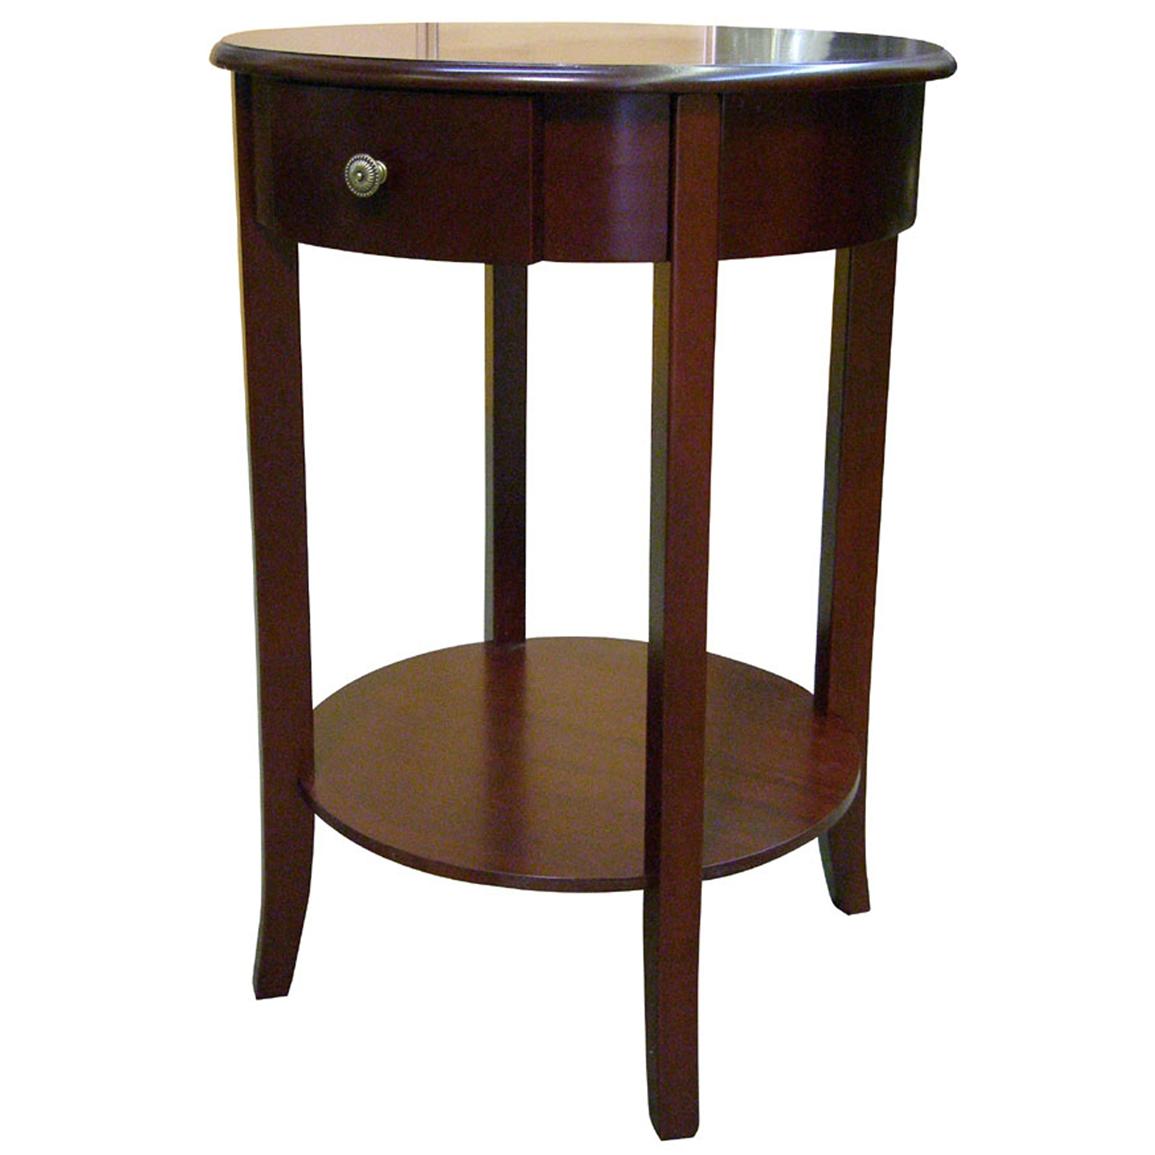 Polaris® Round End Table - 148094, Living Room at Sportsman's Guide